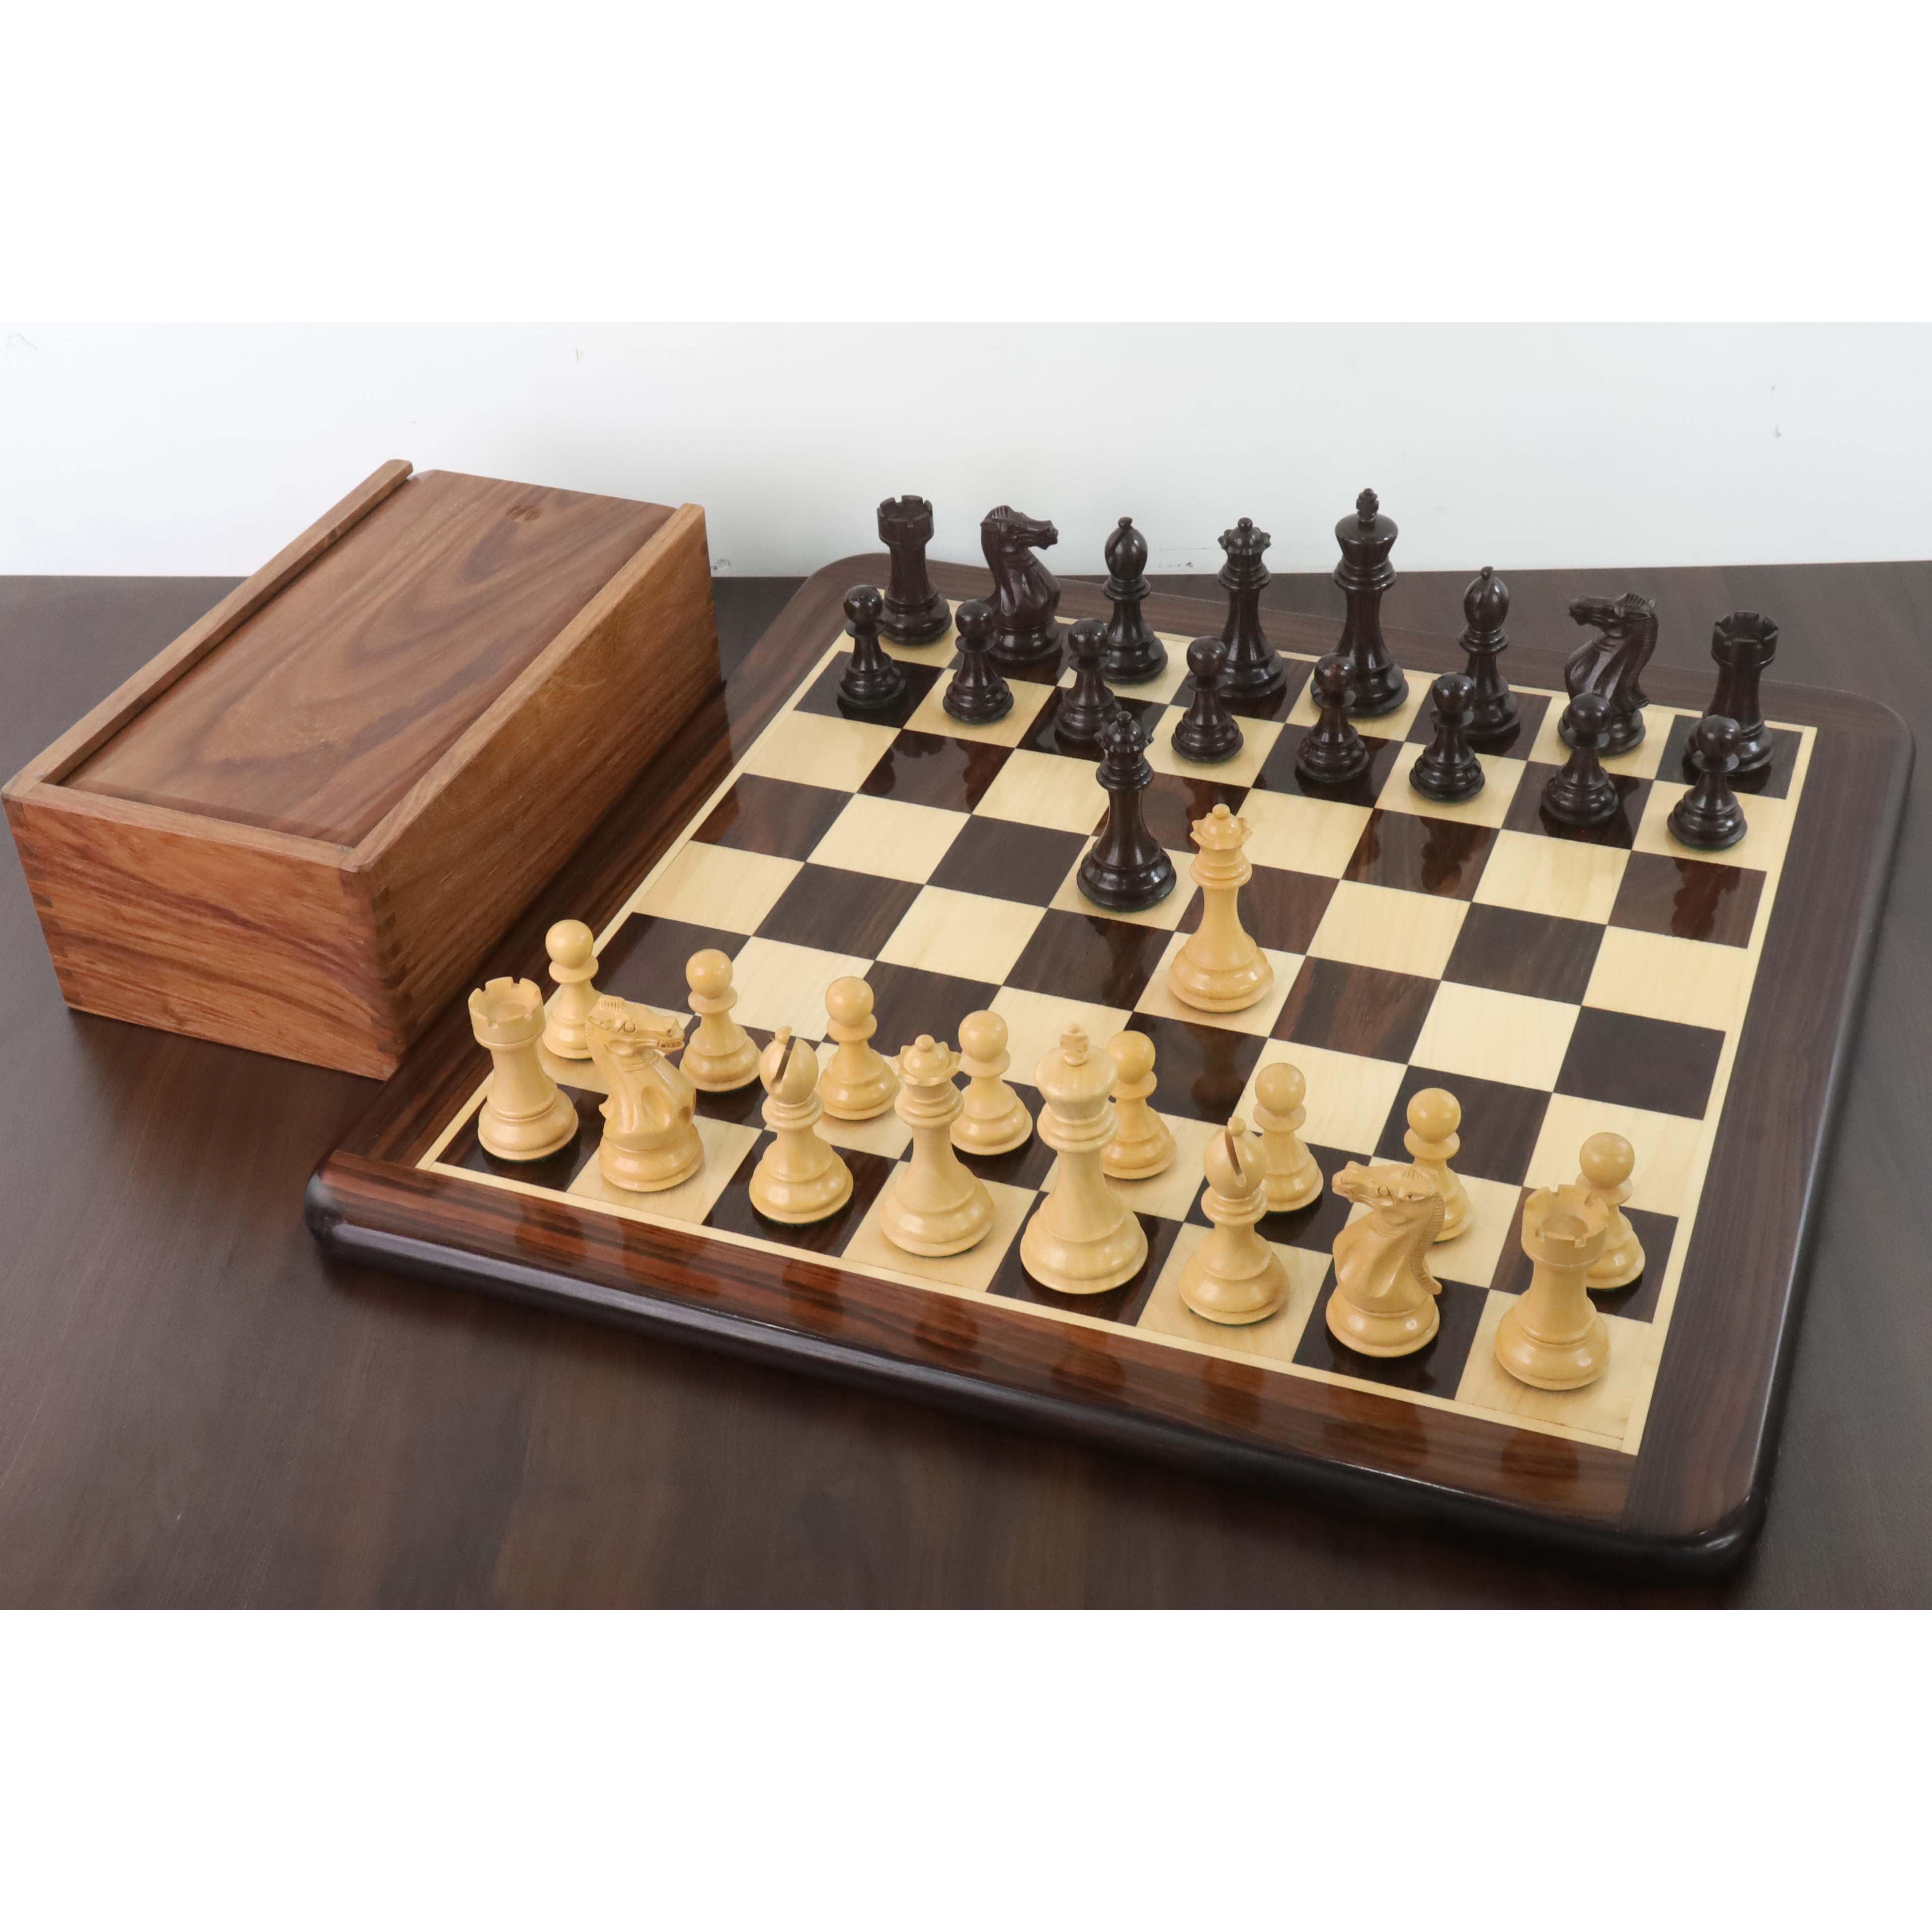 4.1" Pro Staunton Wooden Chess Set- Chess Pieces Only - Weighted Rose wood